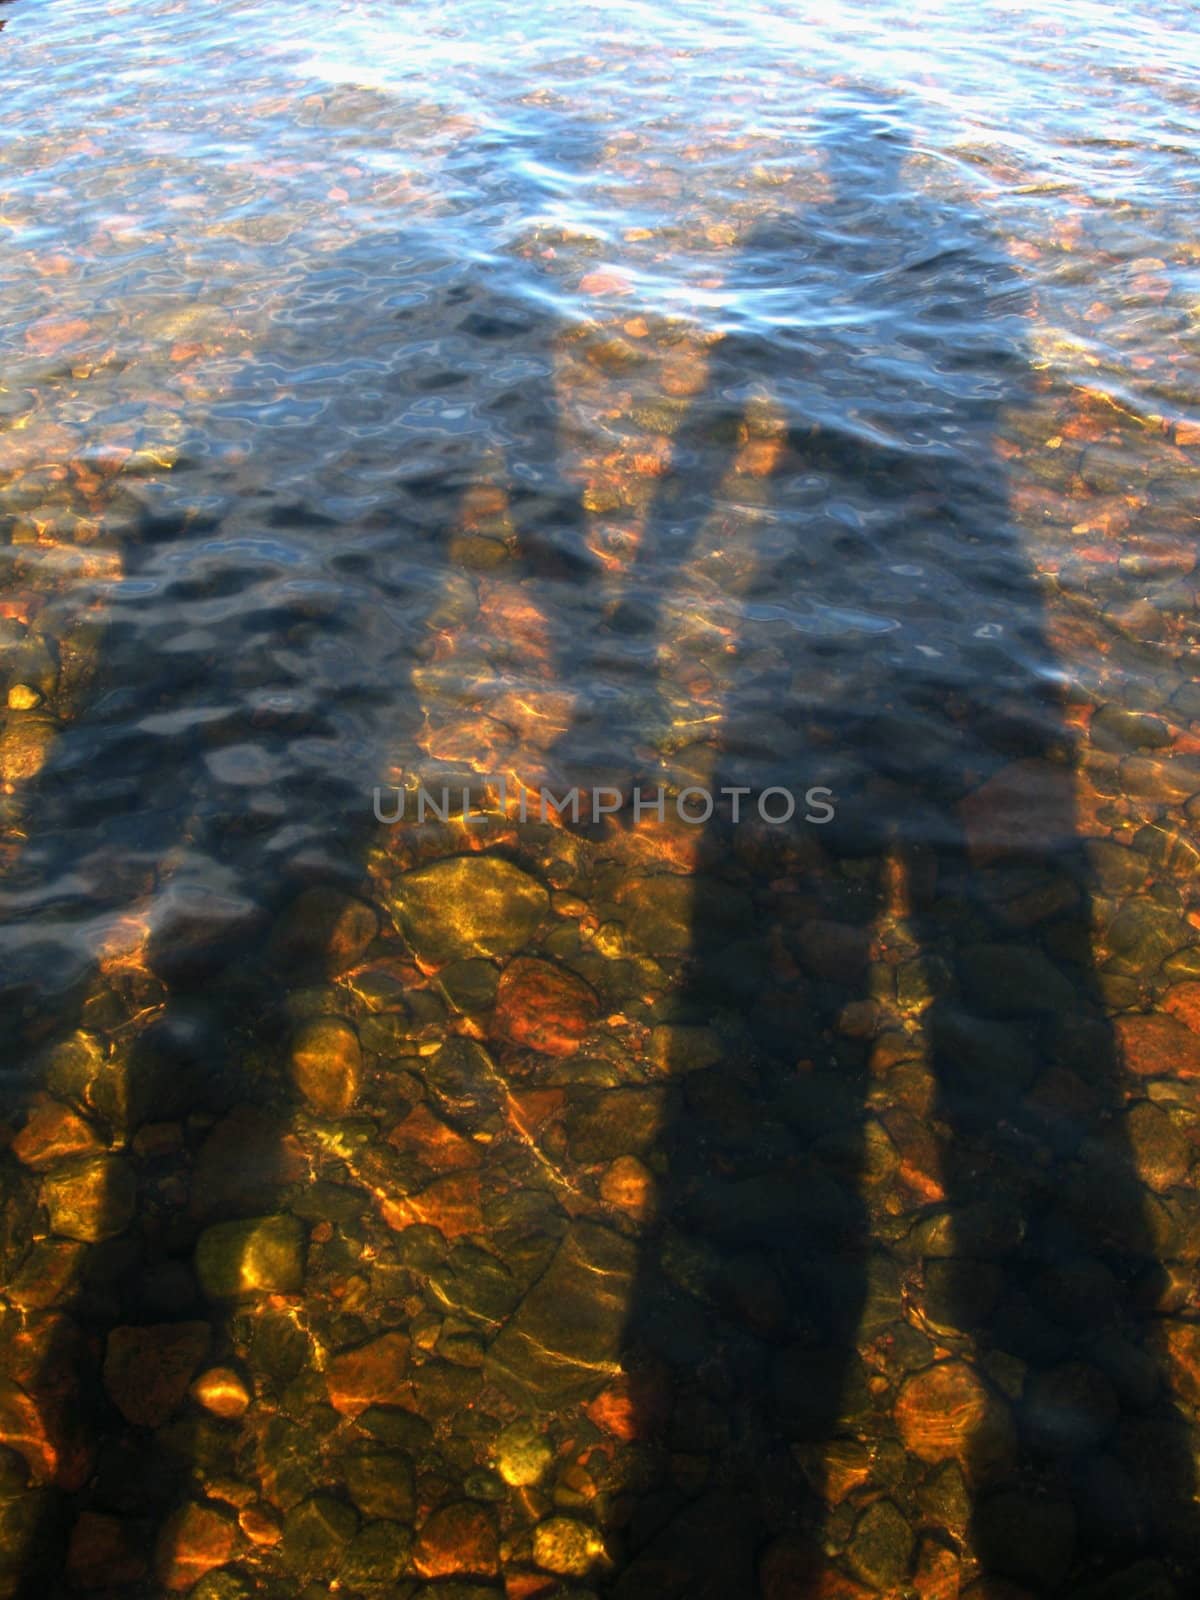 Young pairs shadow on bottom of lake in summer evening